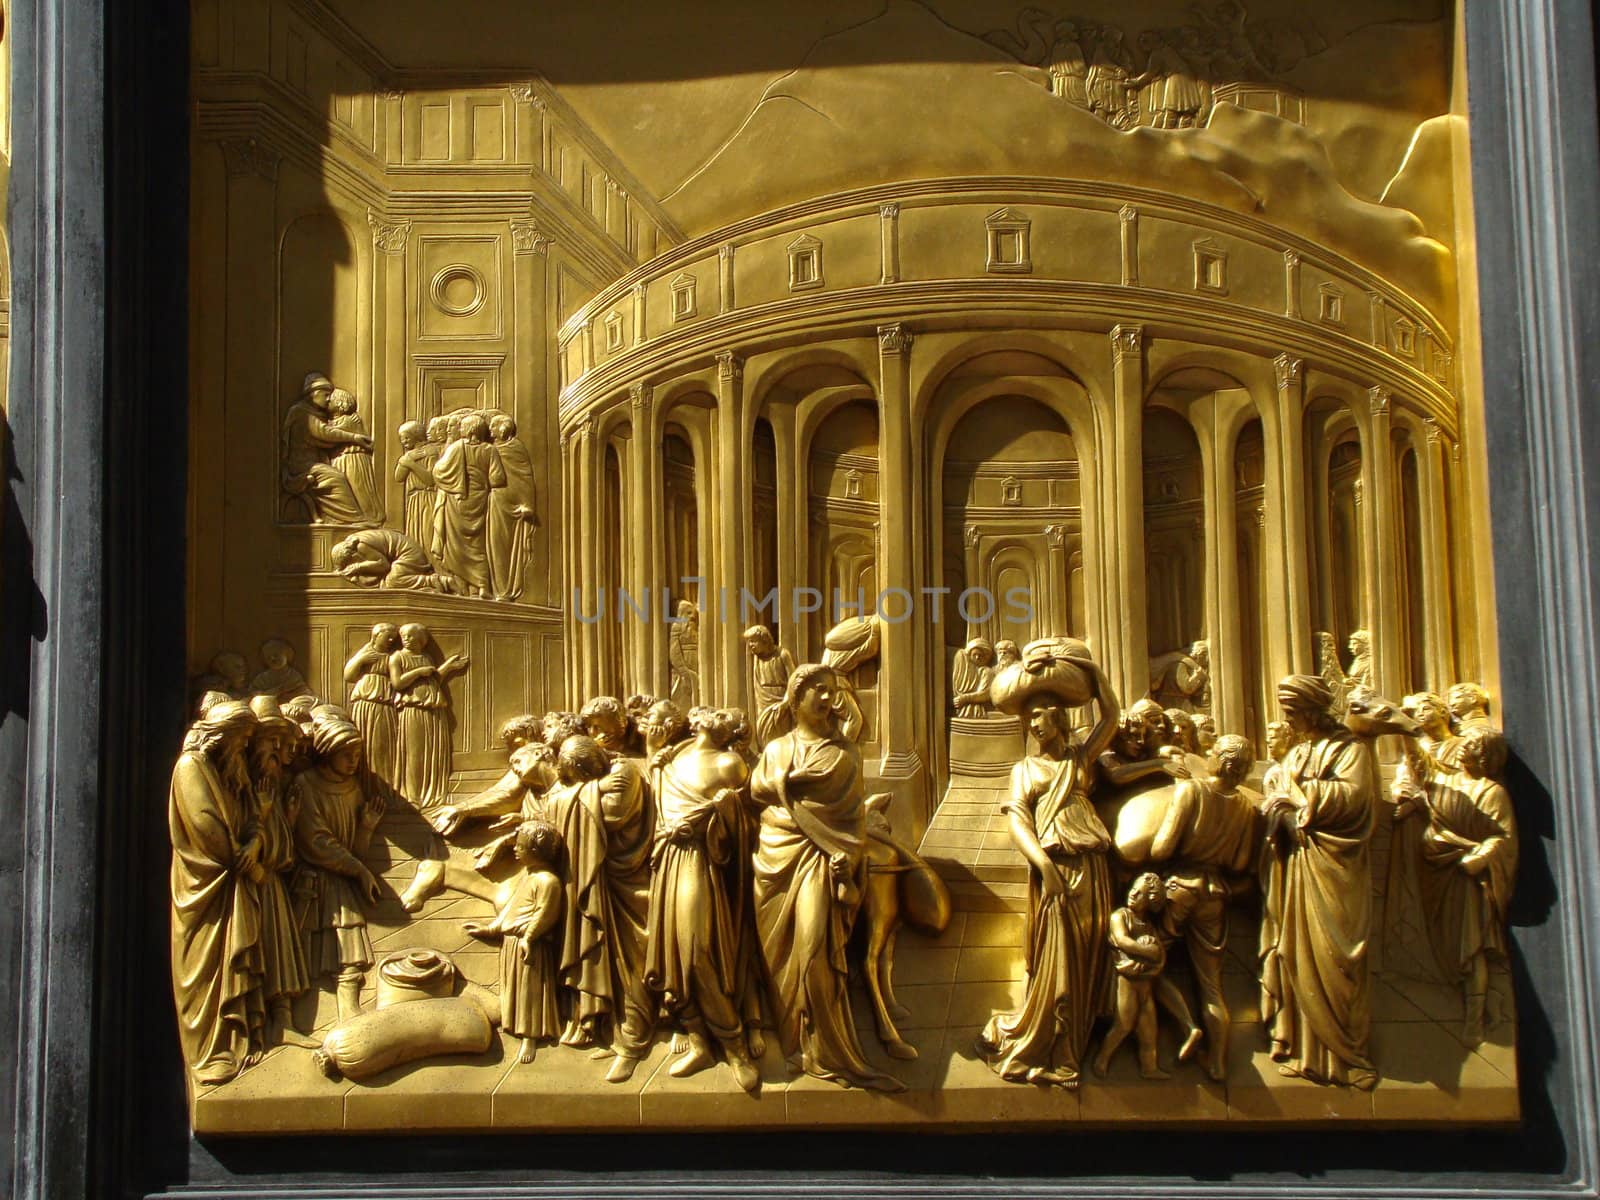 detail of famous Gates of Paradise from baptistry of Florence,Tuscany, Italy.